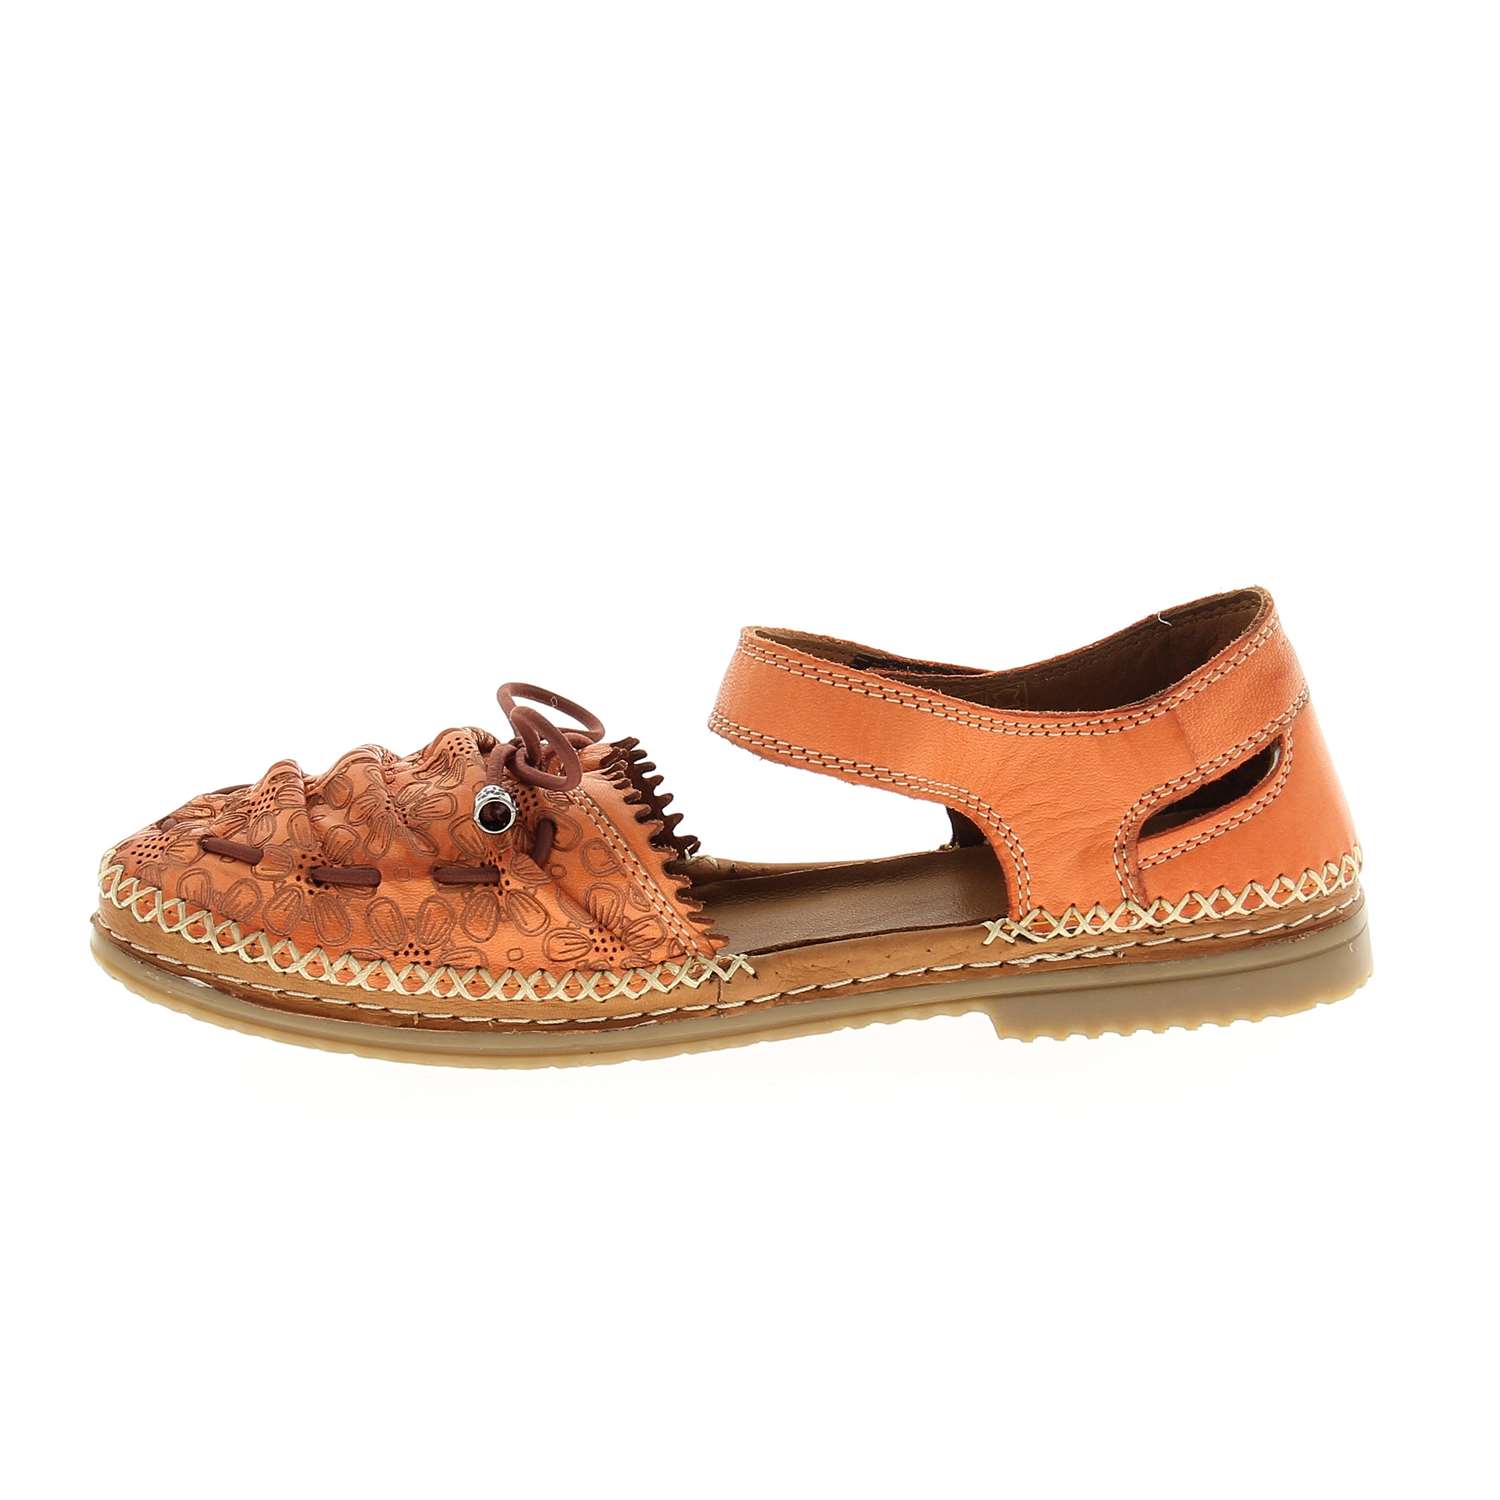 05 - MARLY - MADORY - Ballerines et babies - Cuir